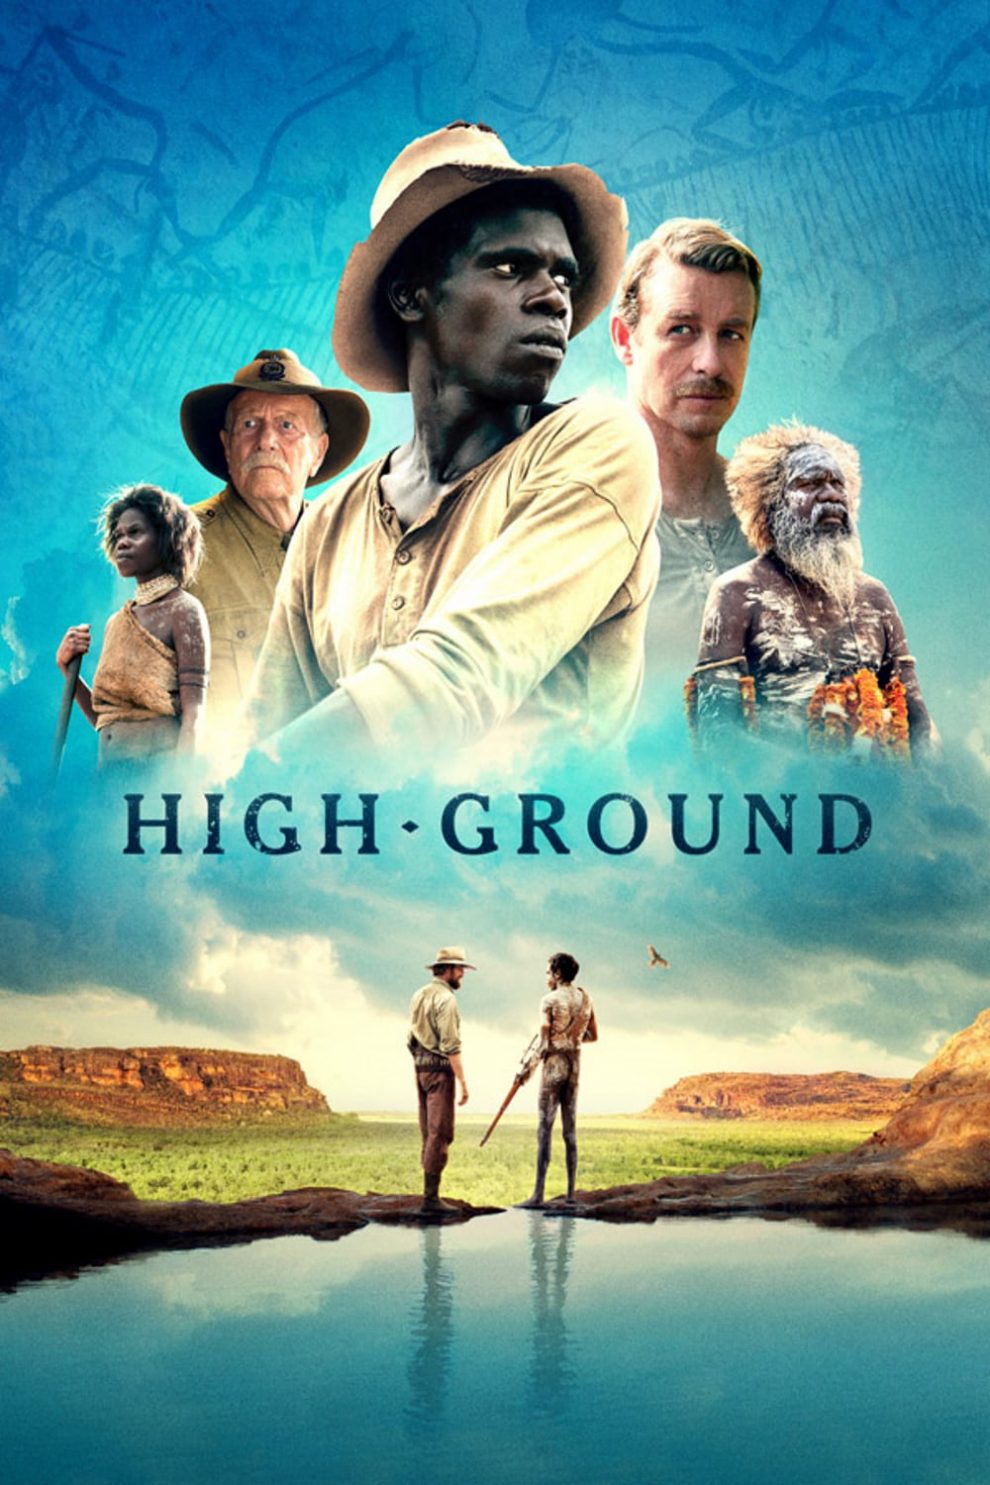 Poster for the movie "High Ground"